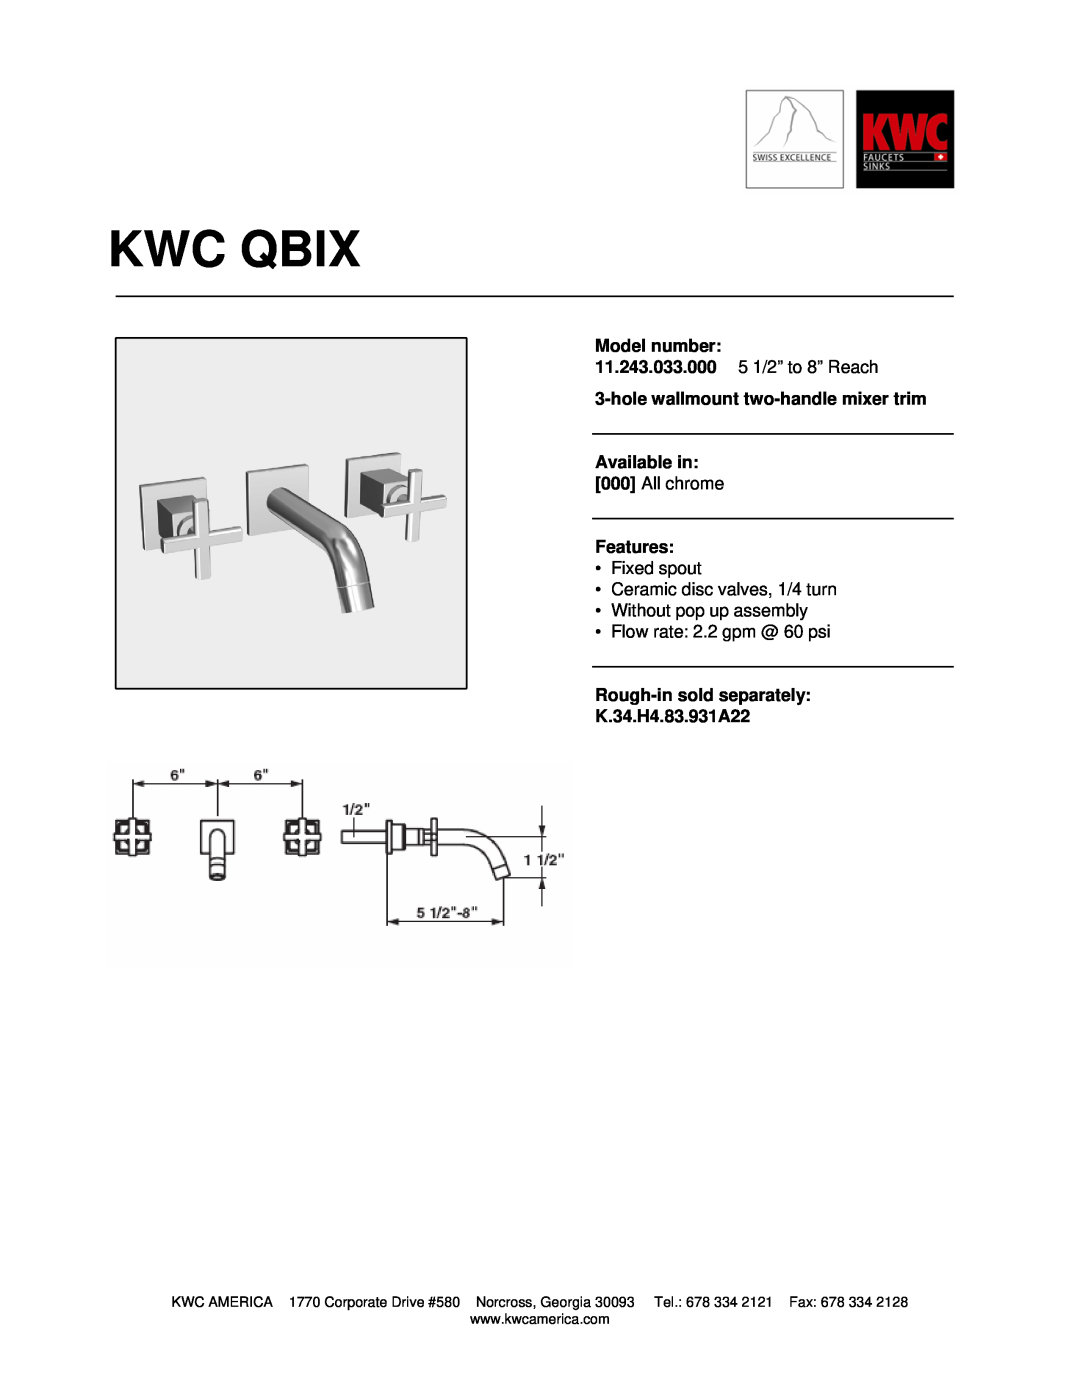 KWC manual Kwc Qbix, Model number, 11.243.033.000 5 1/2” to 8” Reach, holewallmount two-handlemixer trim Available in 